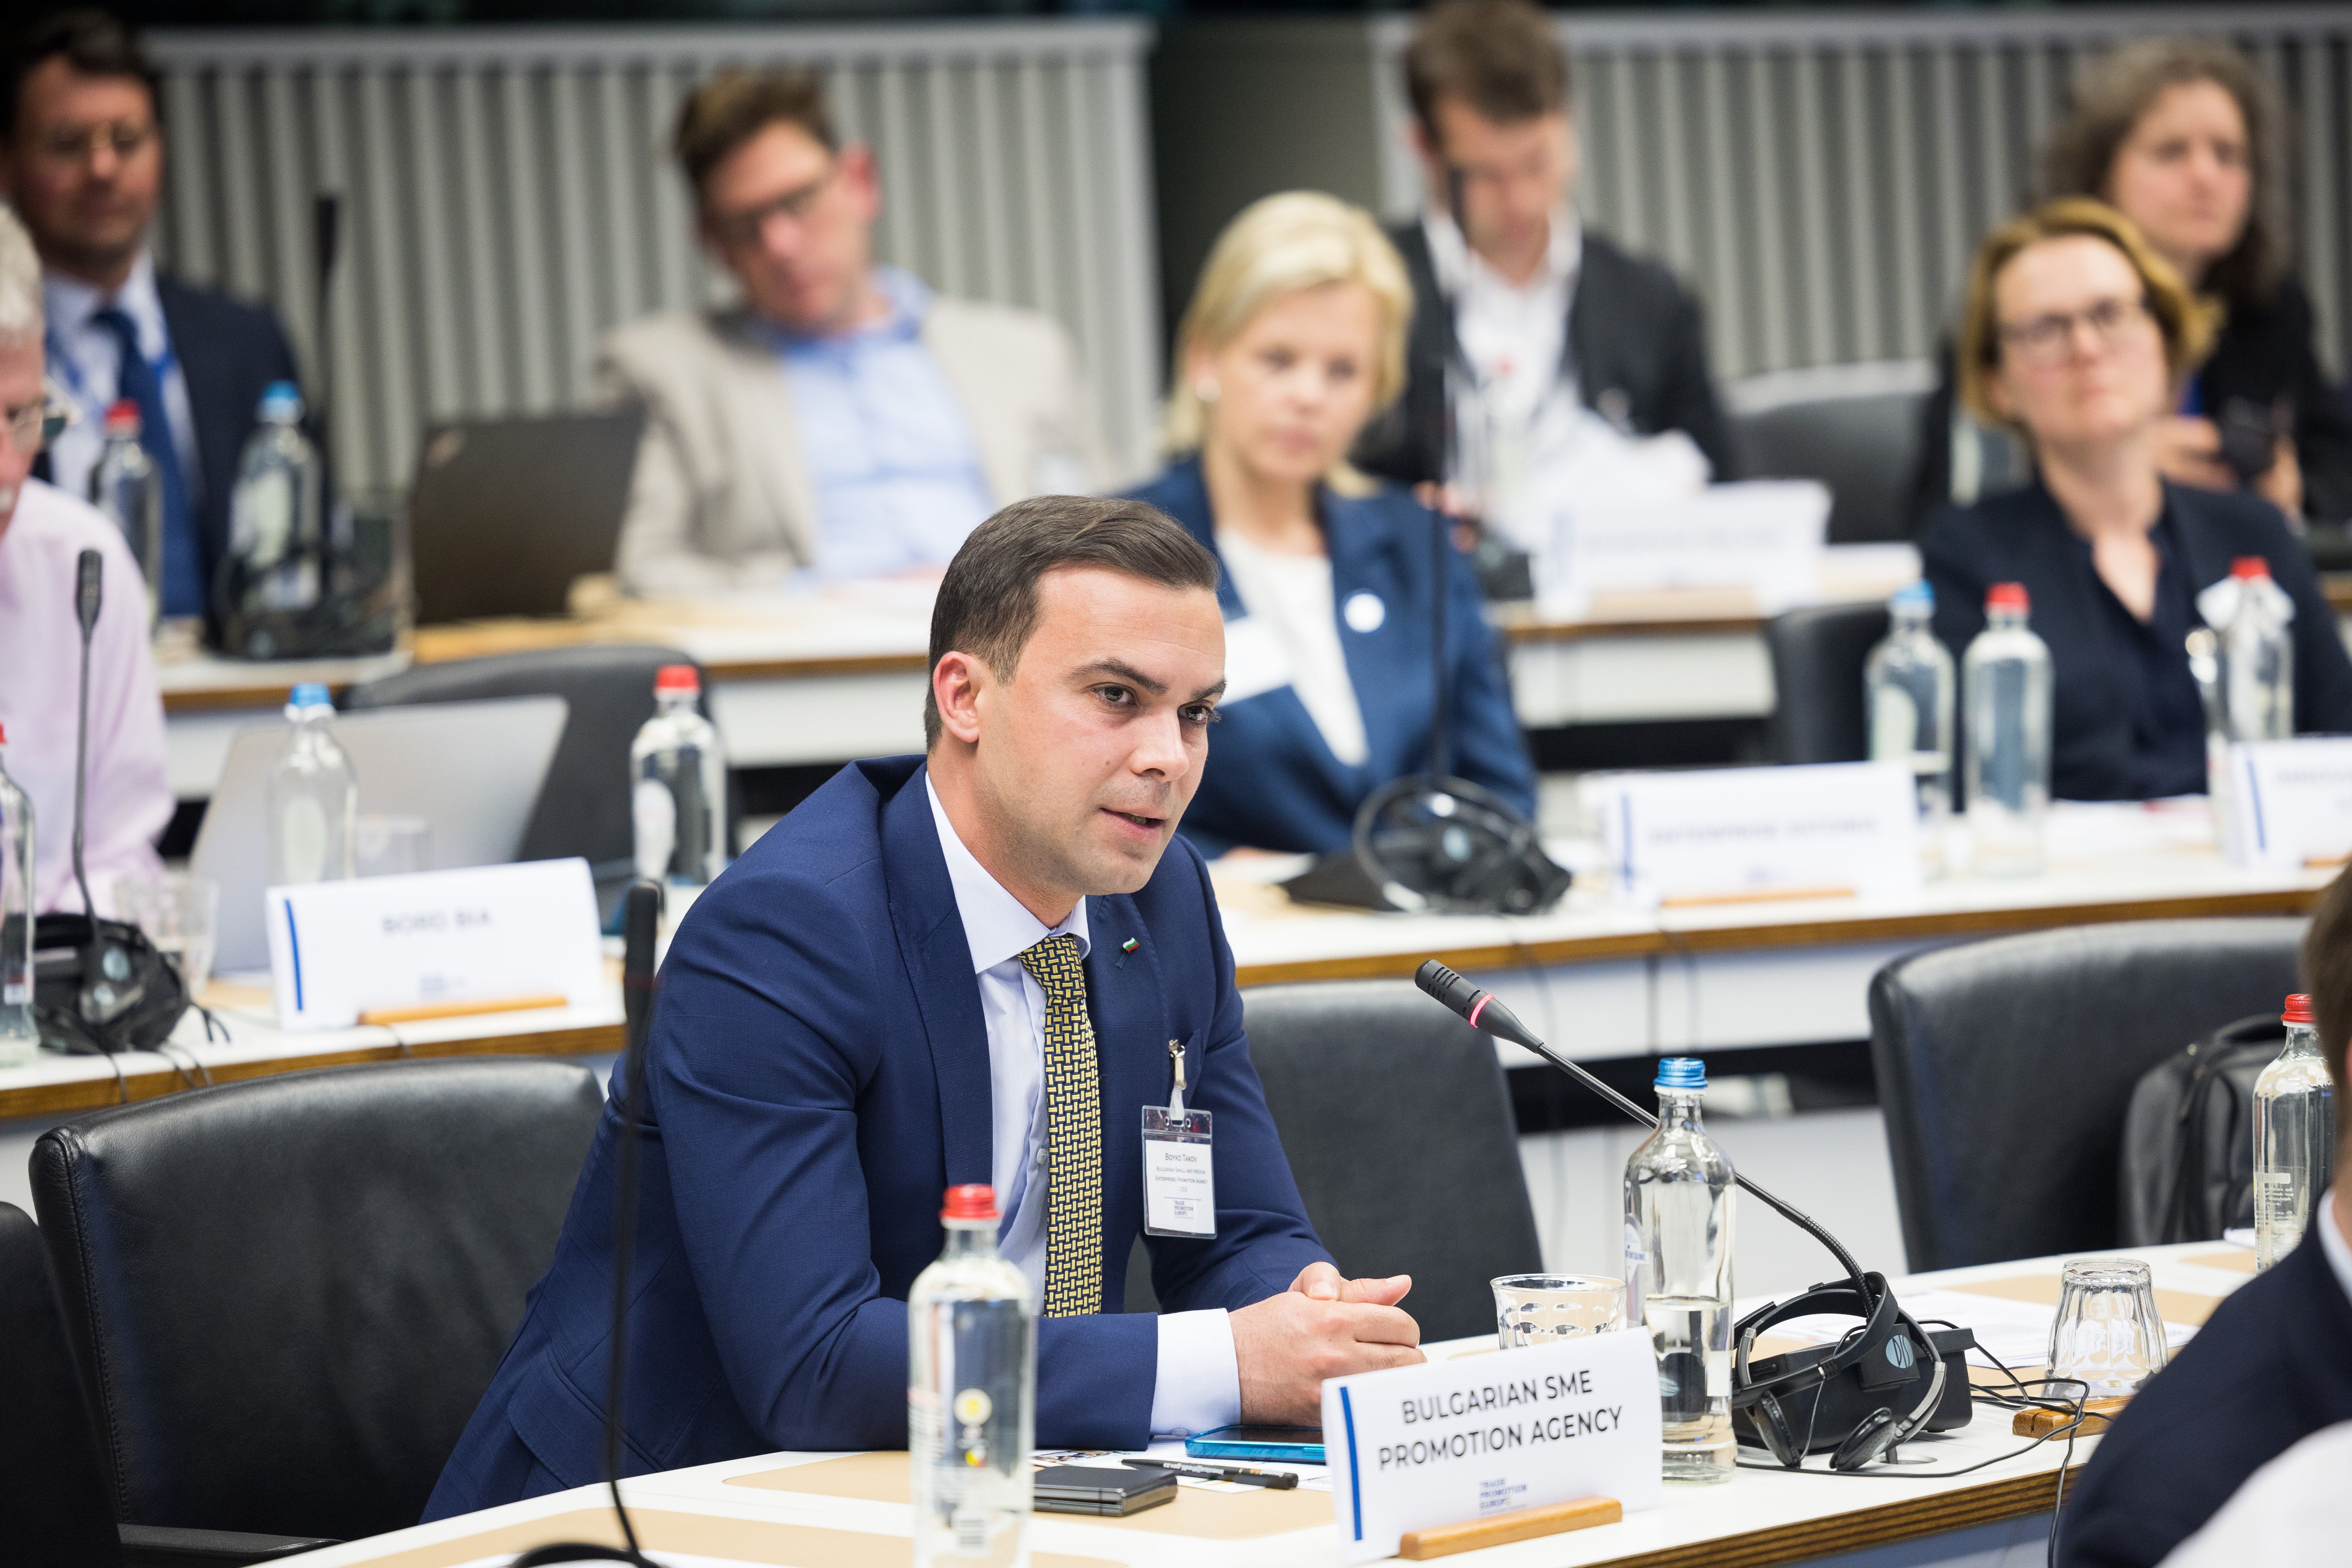 The Trade Promotion Europe Annual Conference Was Held In Brussels